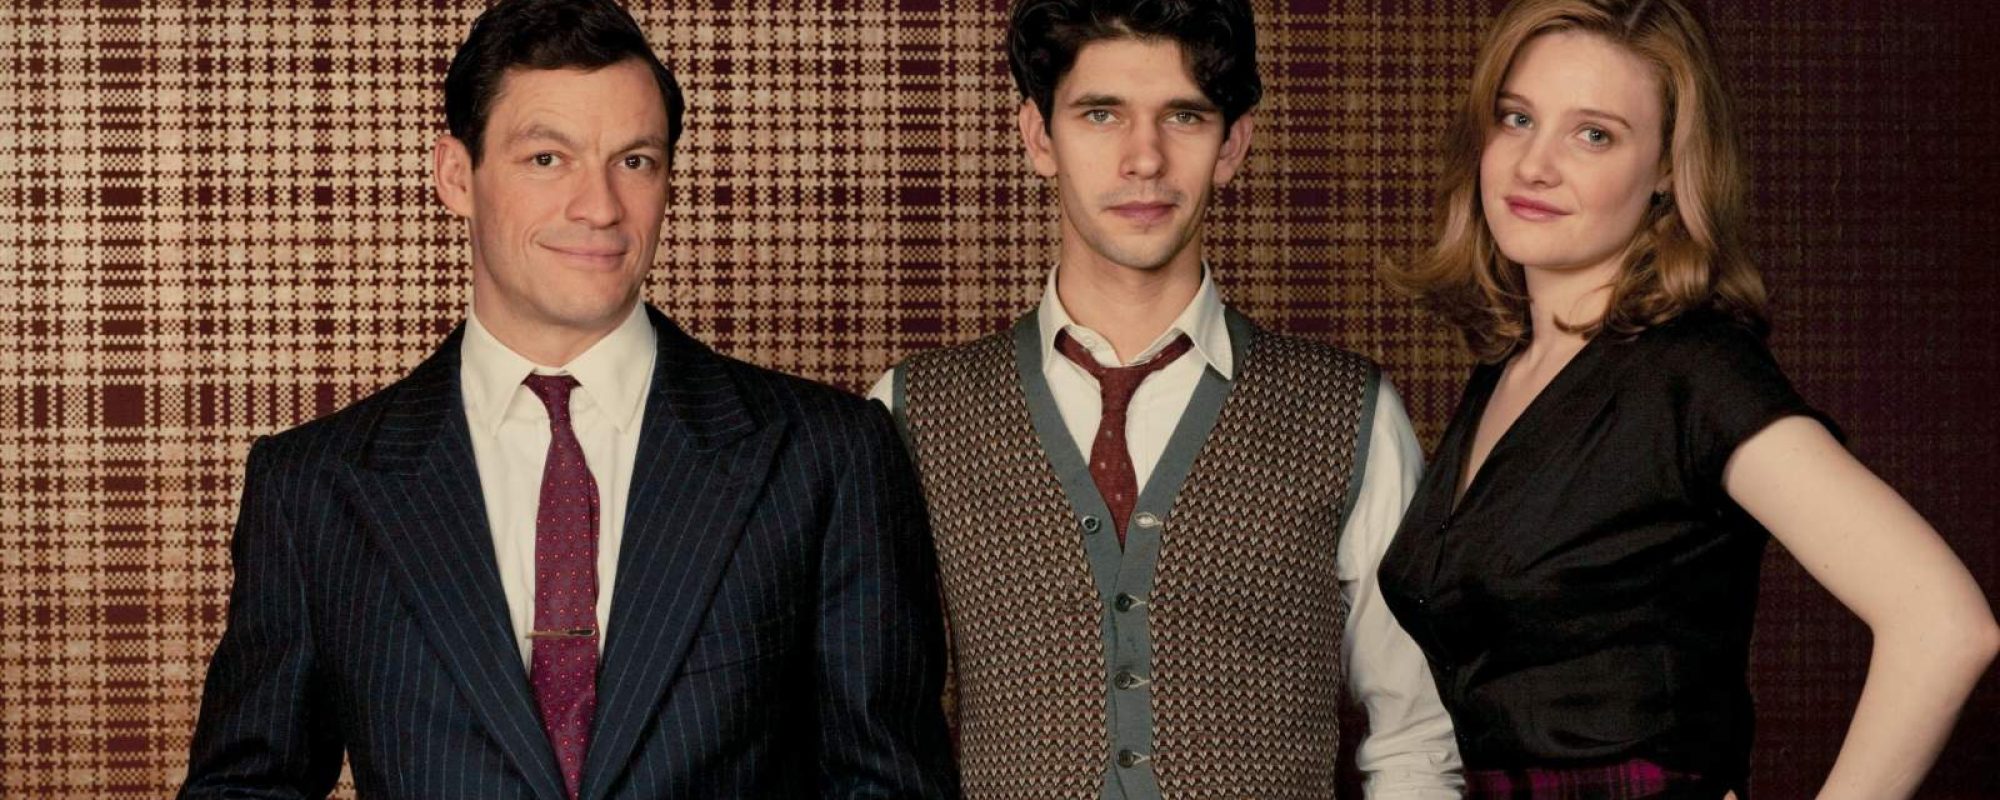 BEN WHISHAW, DOMINIC WEST AND ROMOLA GARAI STAR IN  THE HOUR, COMING TO OVATION TV ON SATURDAY, JULY 17